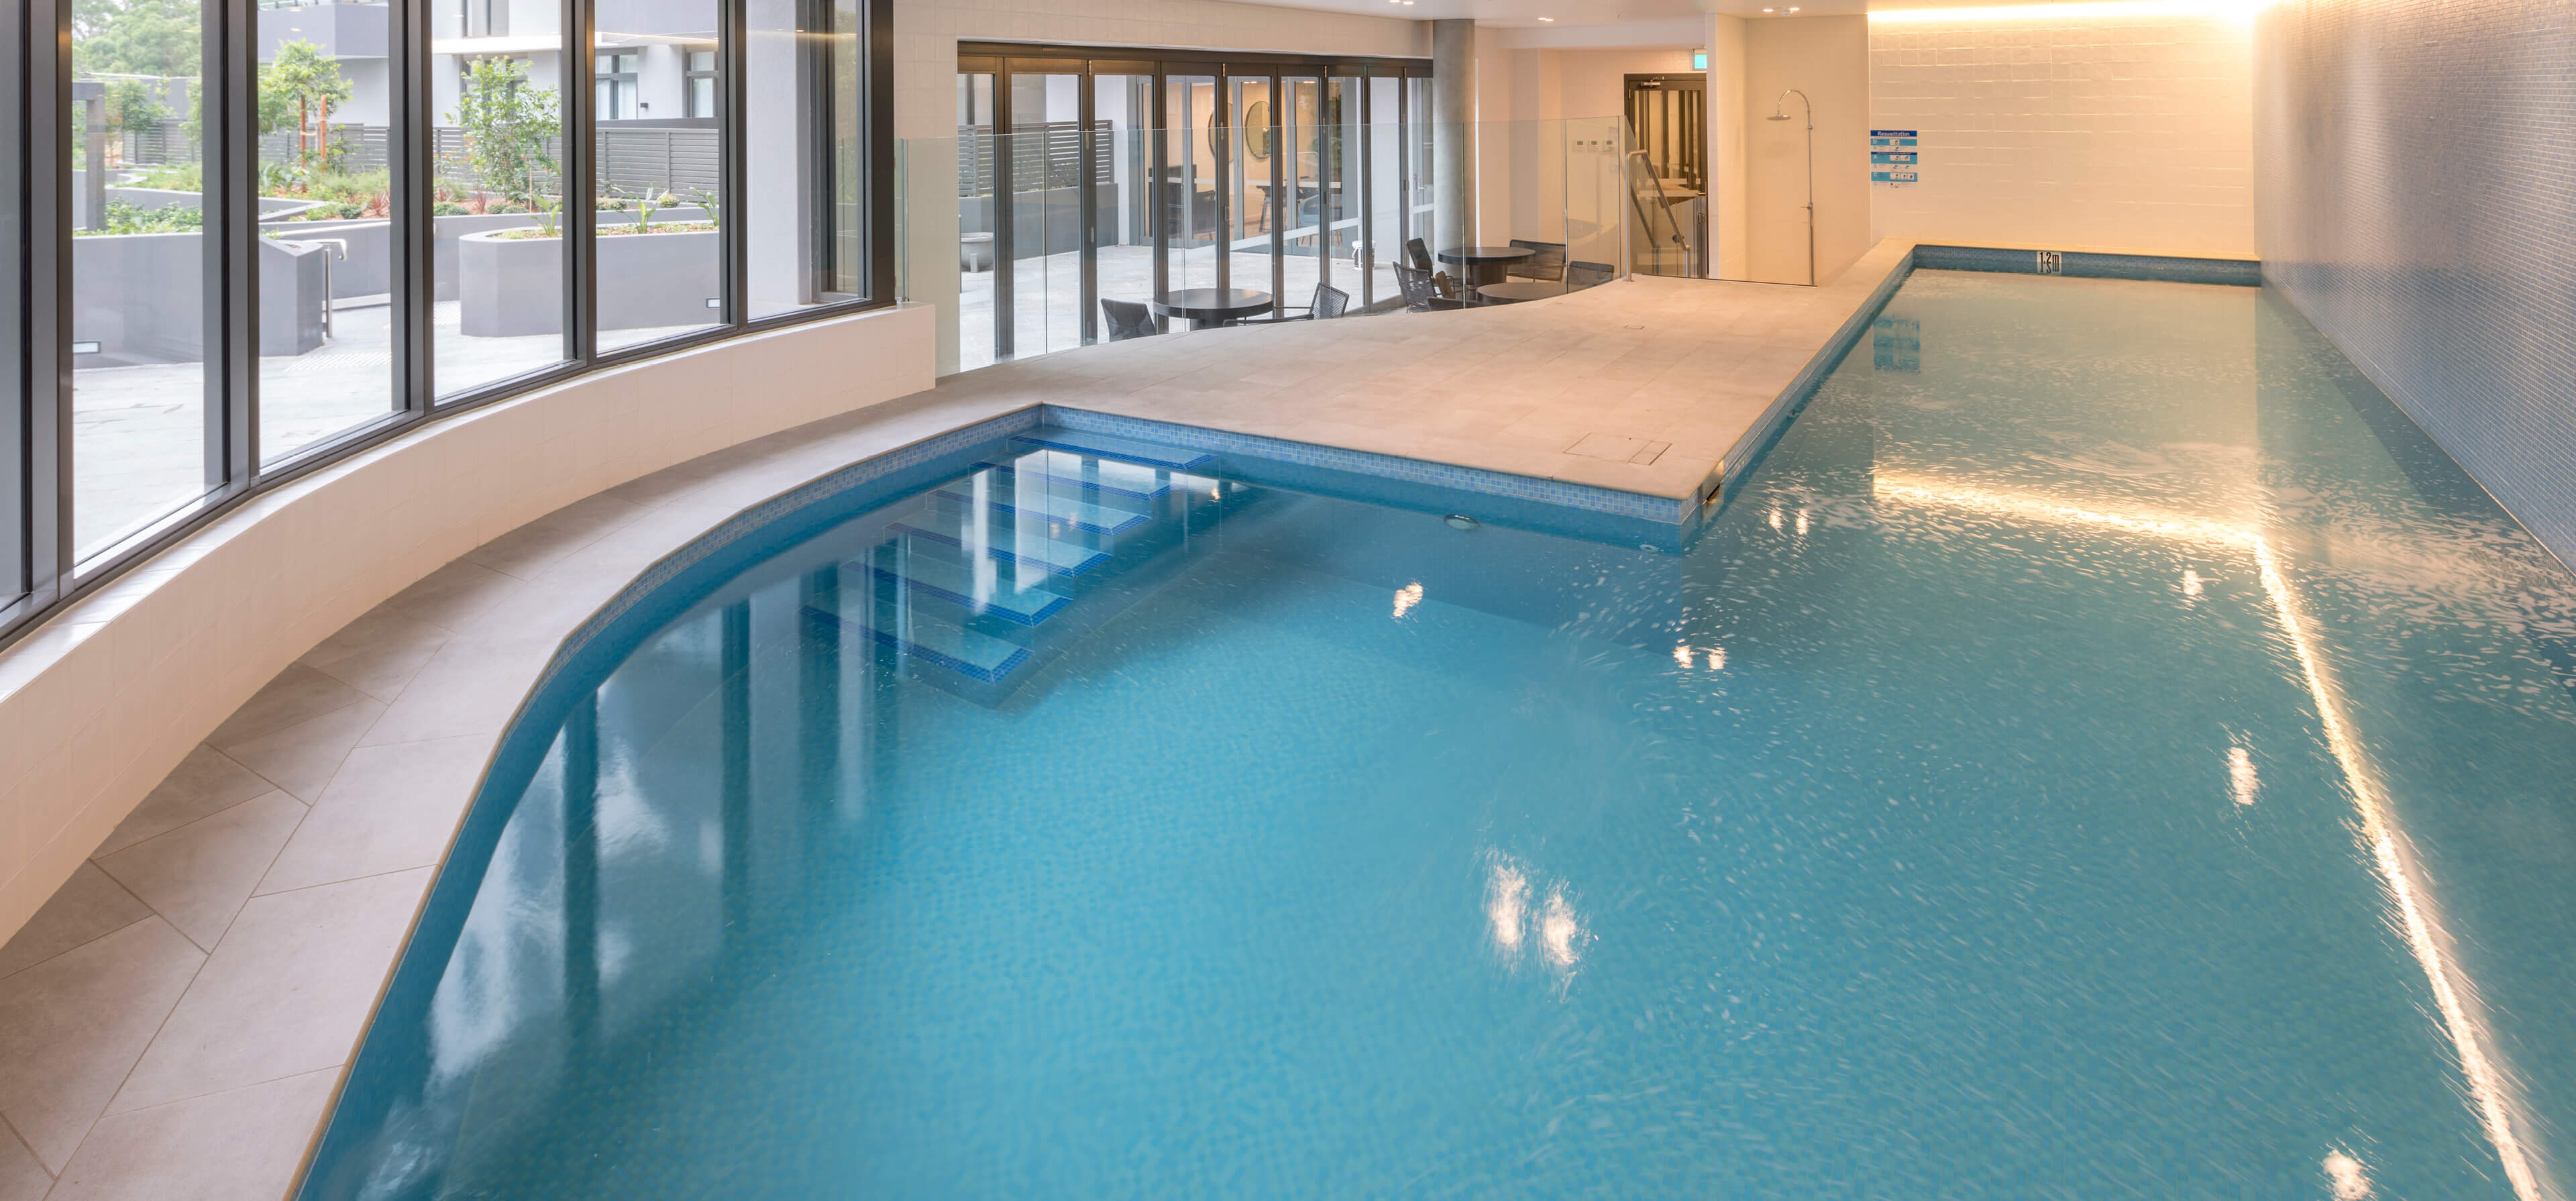 15 indoor heated swimming pool at haven apartments baulkham hills taylor construction residential